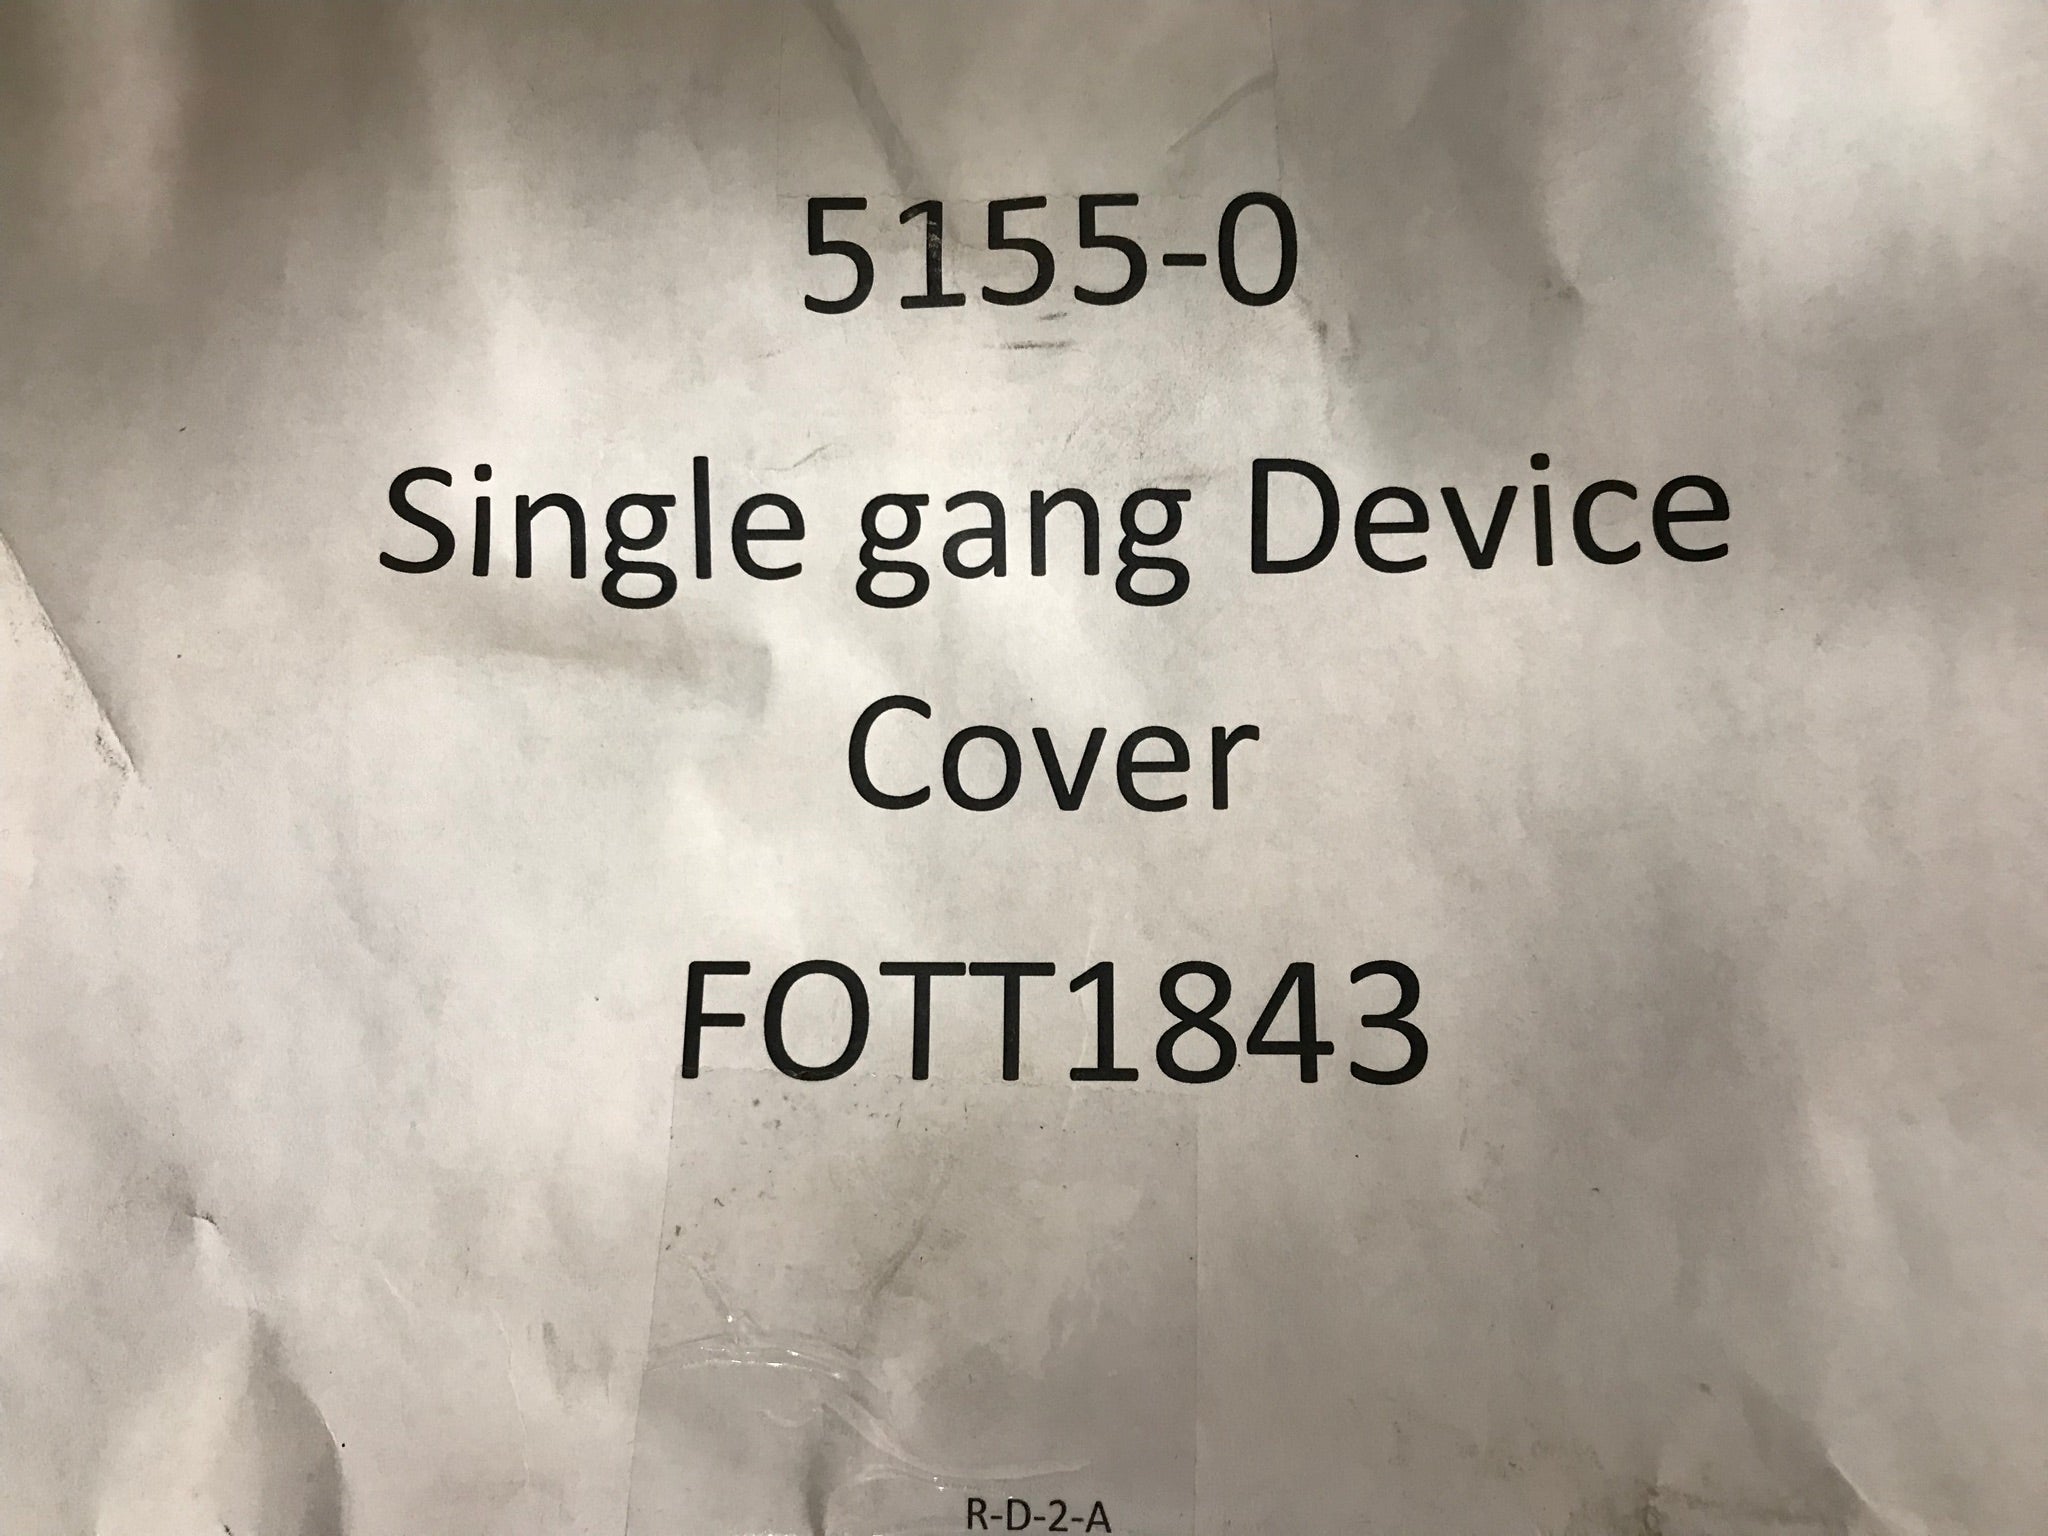 Single gang Device Cover